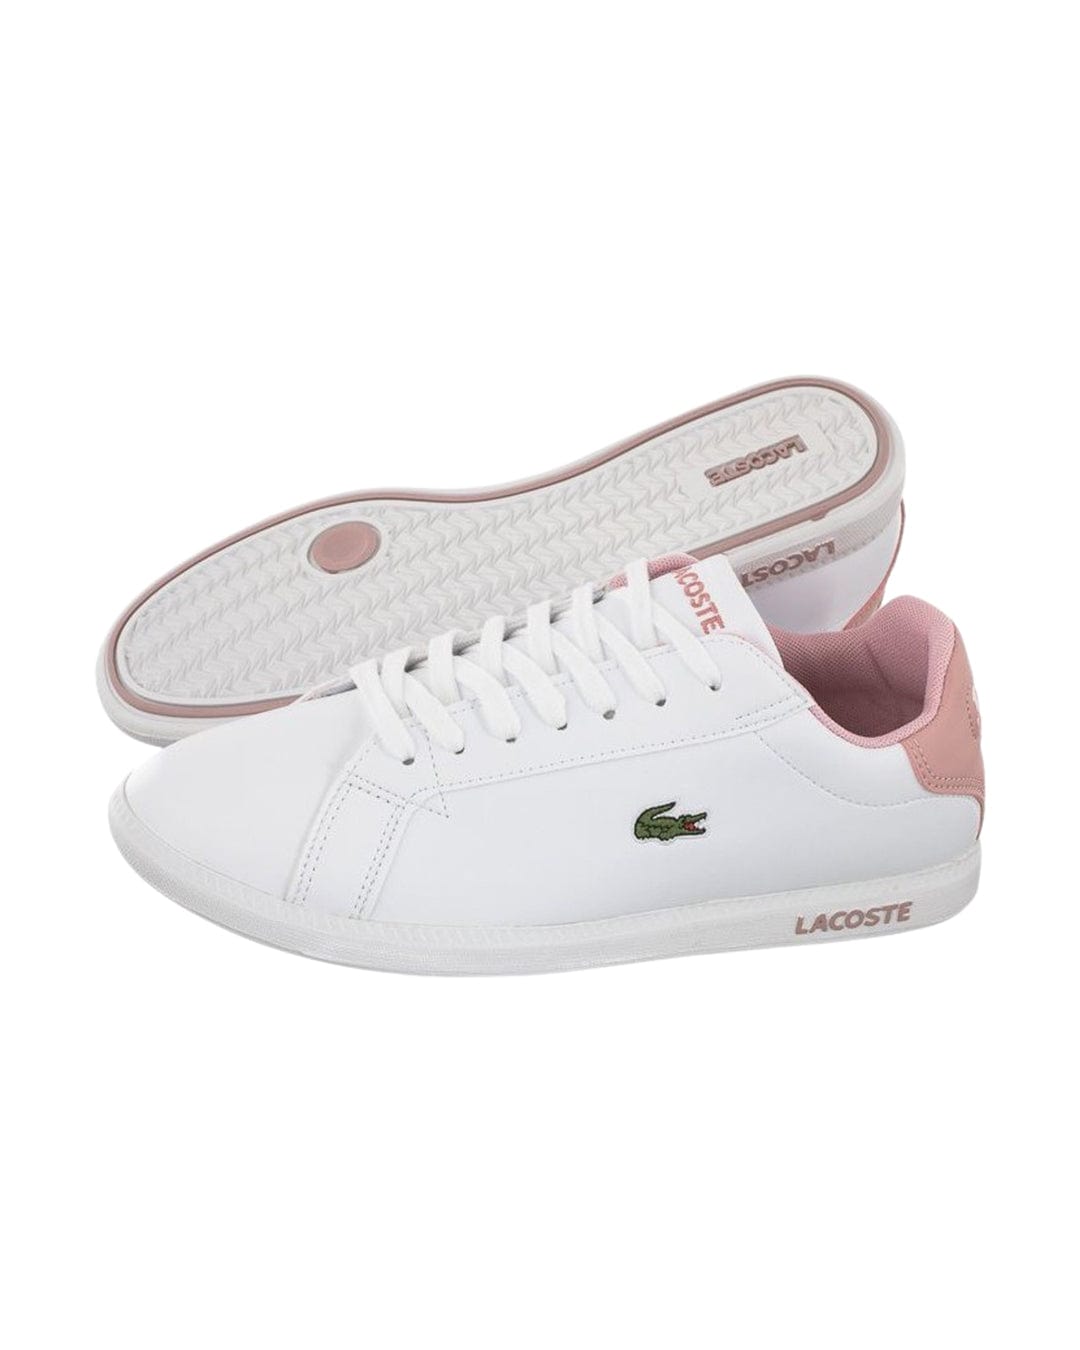 Lacoste Shoes Girls Lacoste Court Drive Textile Sneakers